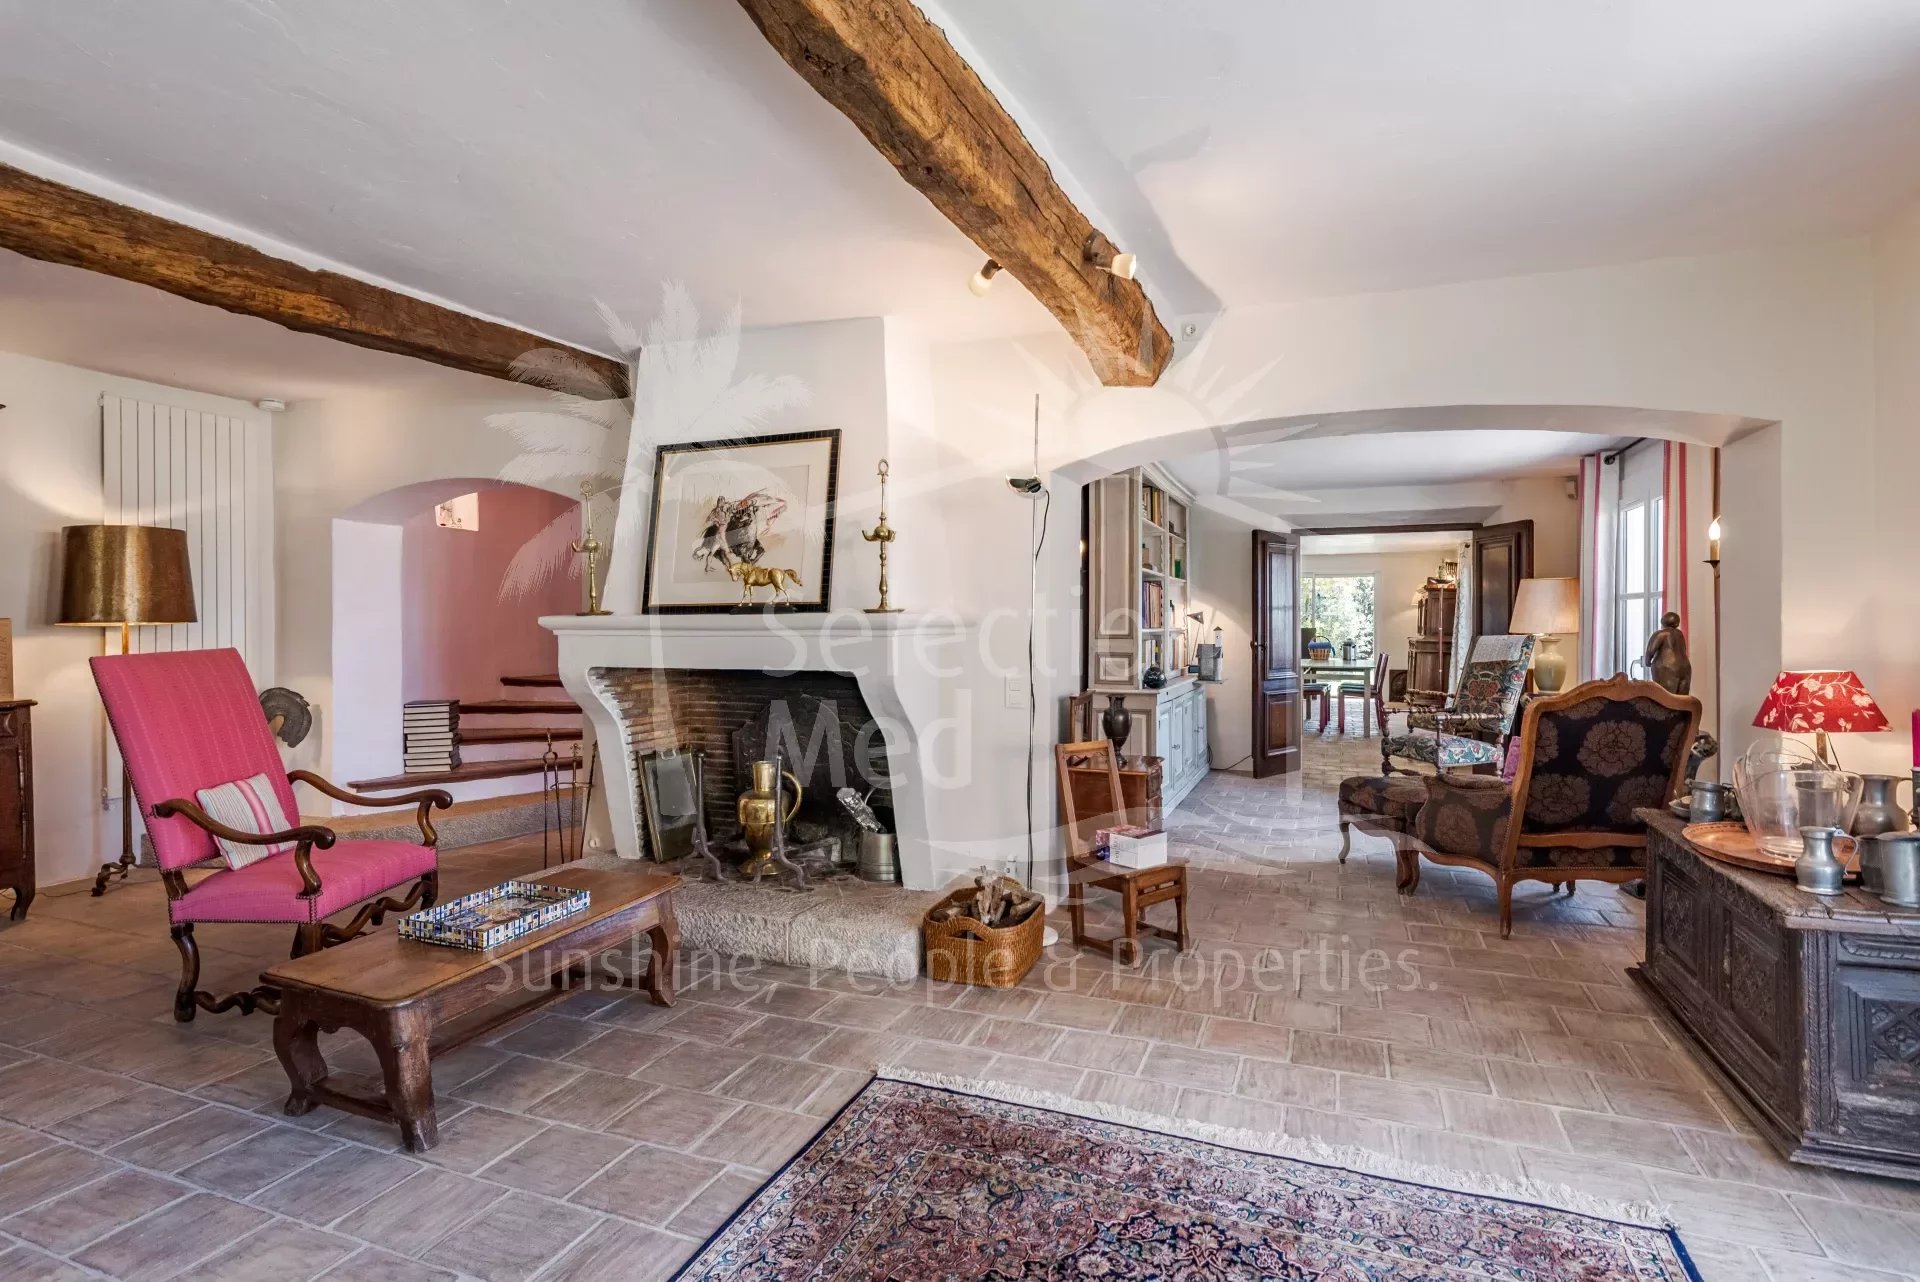 Traditional Provencal property sole agent